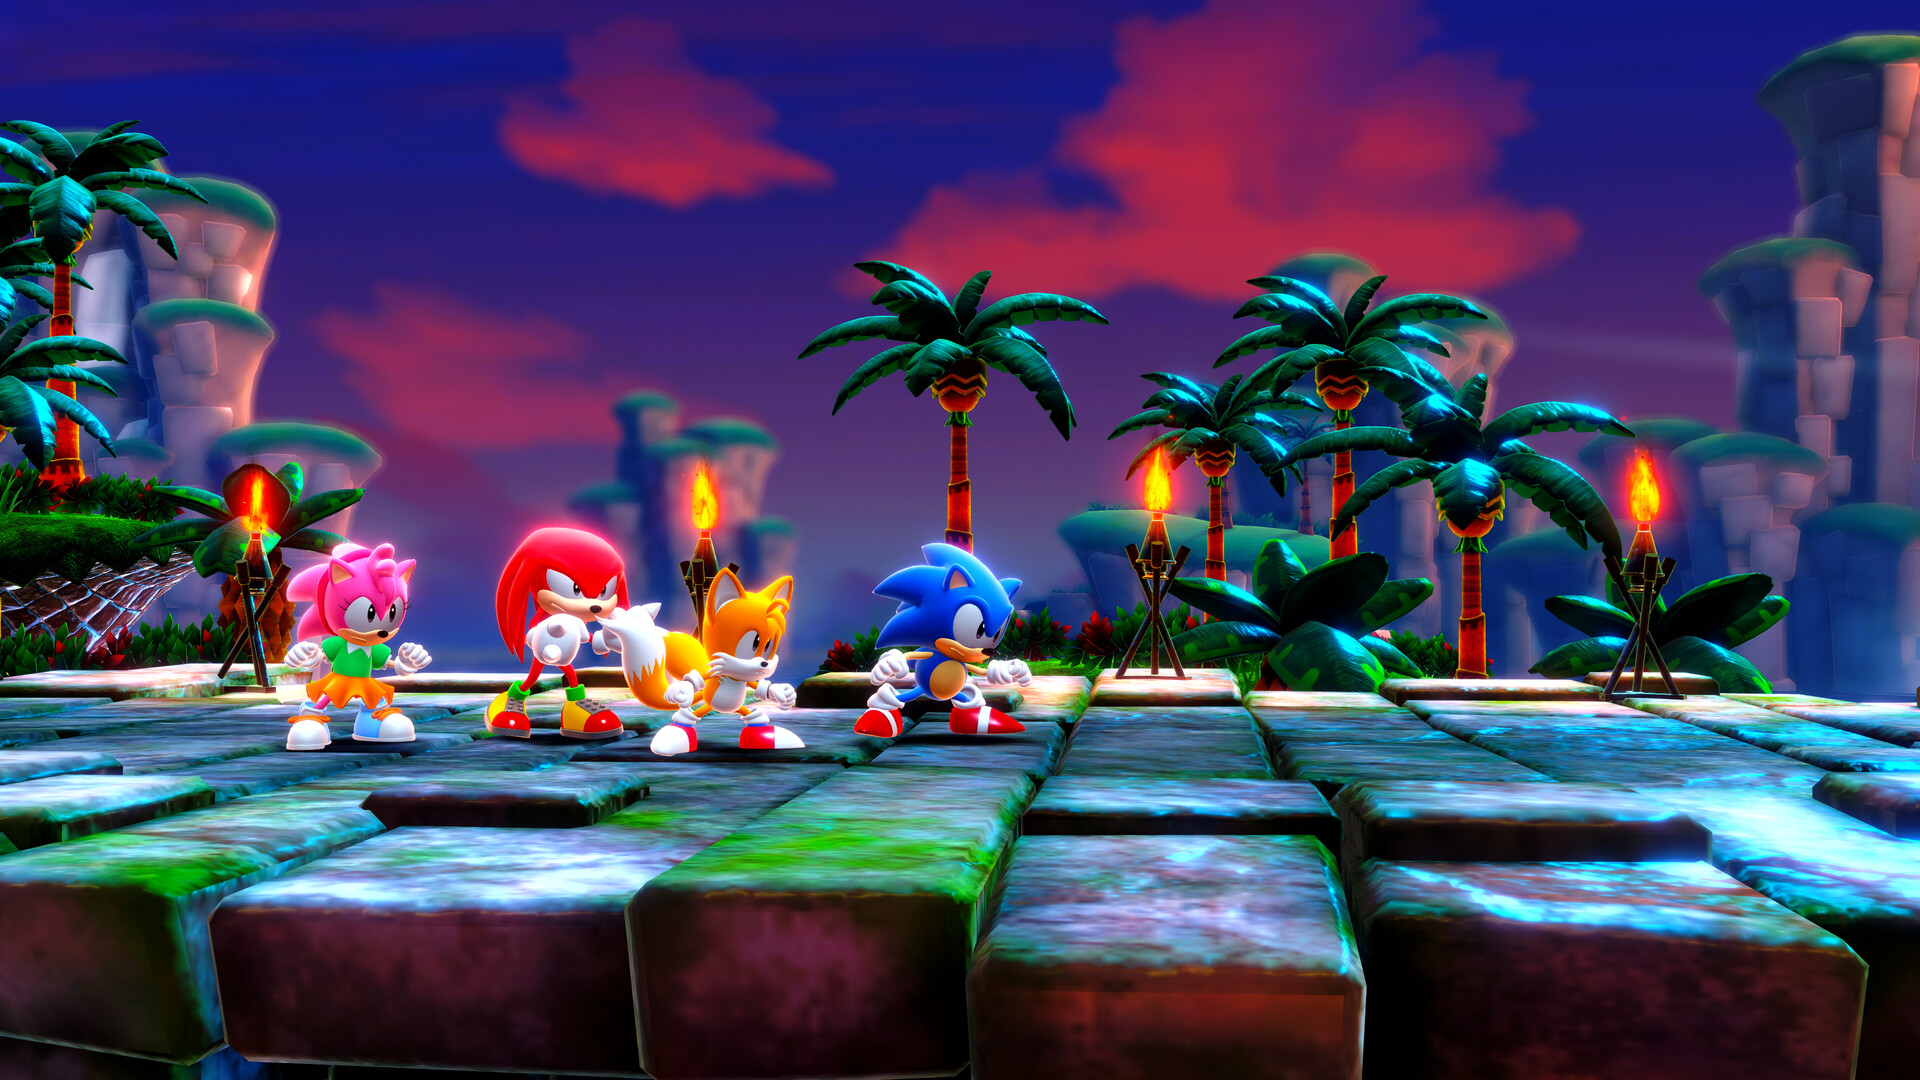 Sonic Superstars Pre-Order Guide: All Editions, Prices, and where to buy in  the US, UK & Australia